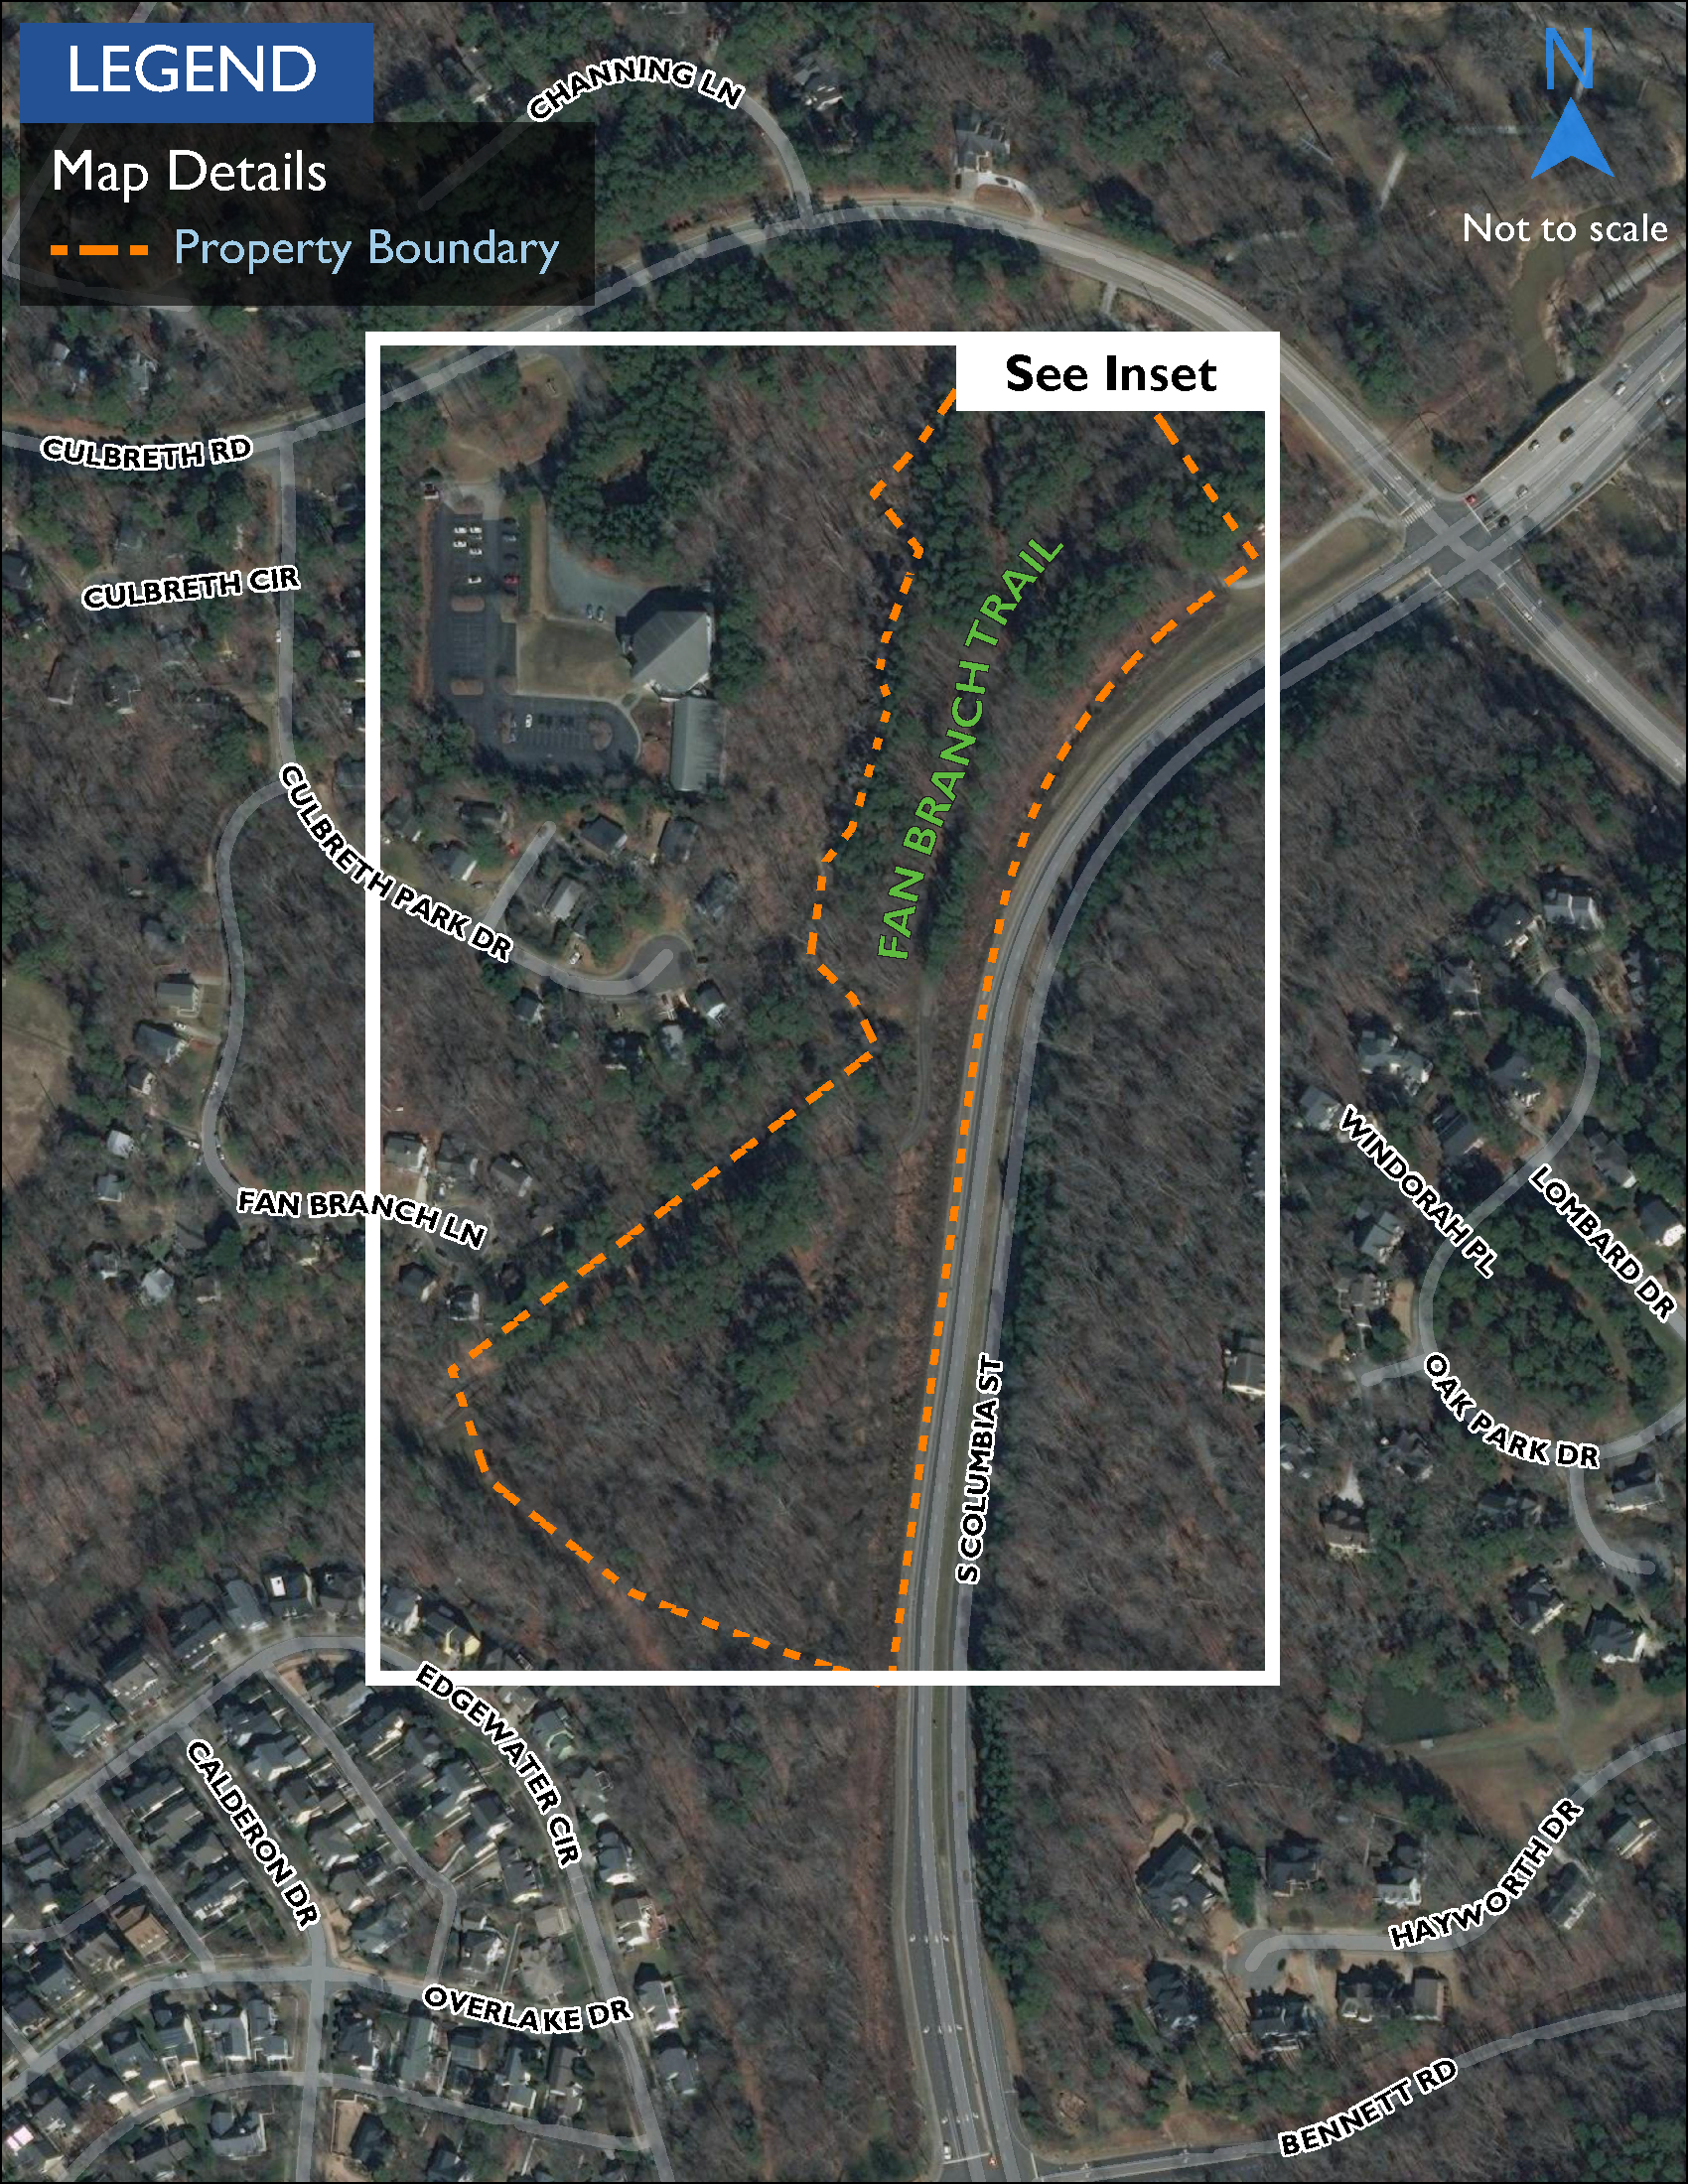 Map showing Fan Branch Trail, a 1.6-mile shared-use path surrounded by parkland that connects Southern Village, Hyatt Place, Southern Community Park and Morgan Creek Trail. 